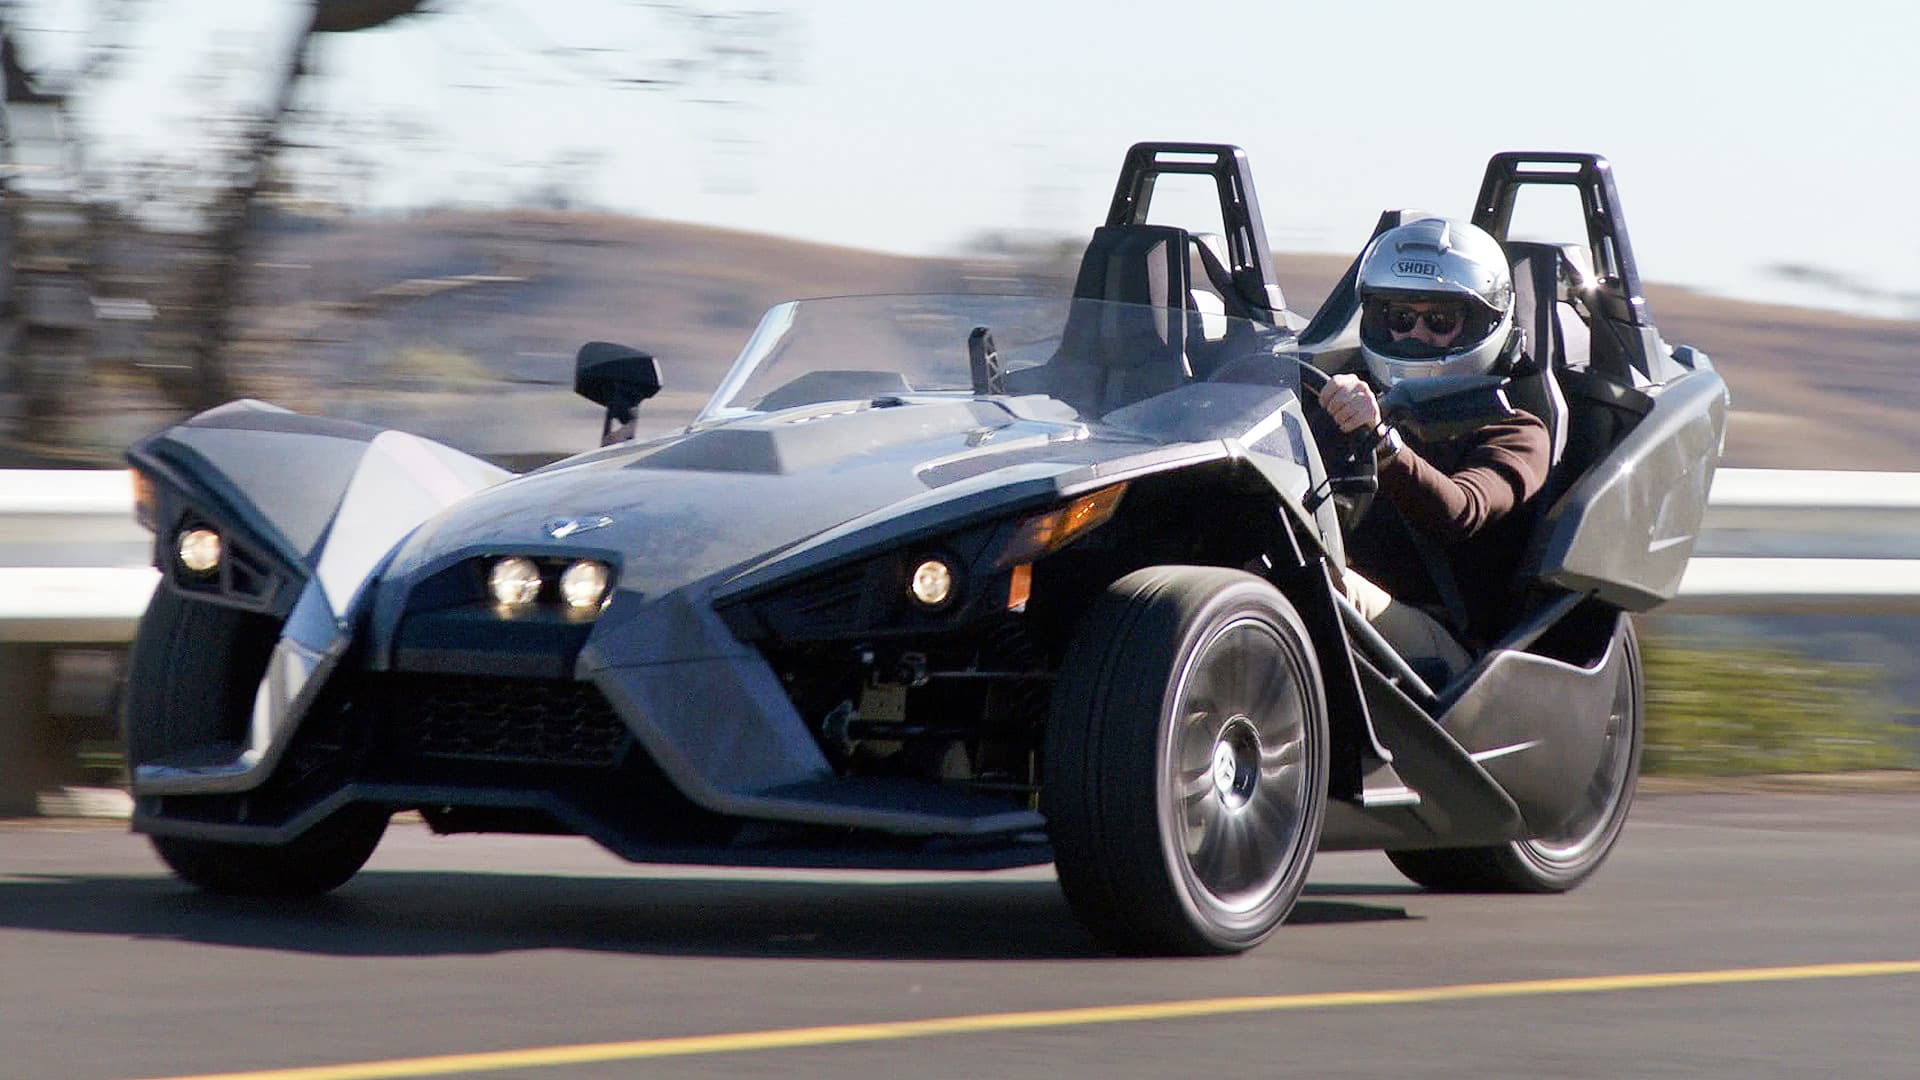 3-wheeled motorcycles are the new trend—but are they a good investment?